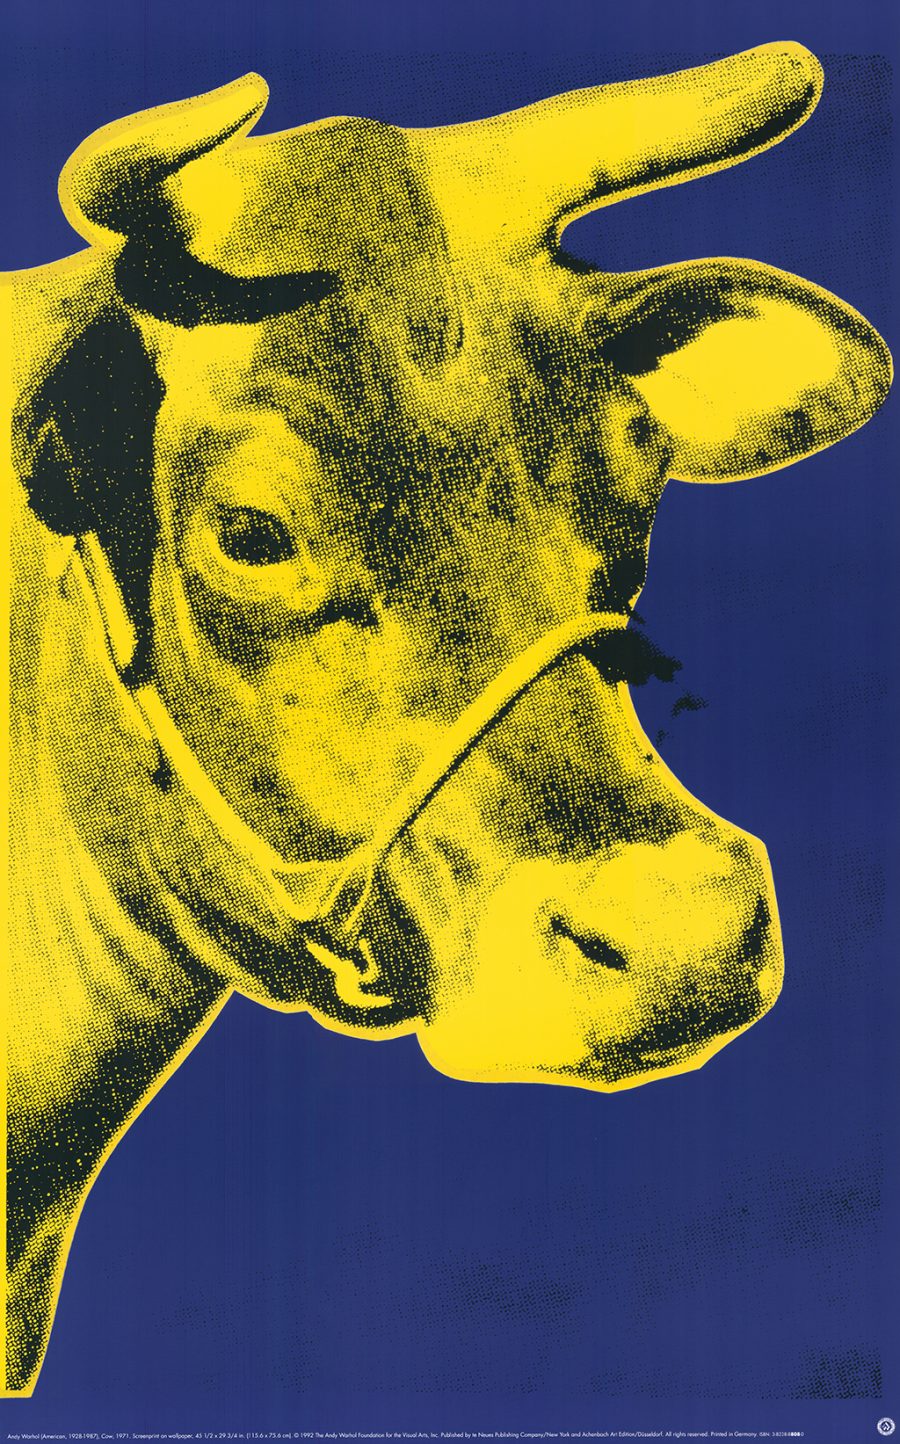 Cows - Andy Warhol (after)